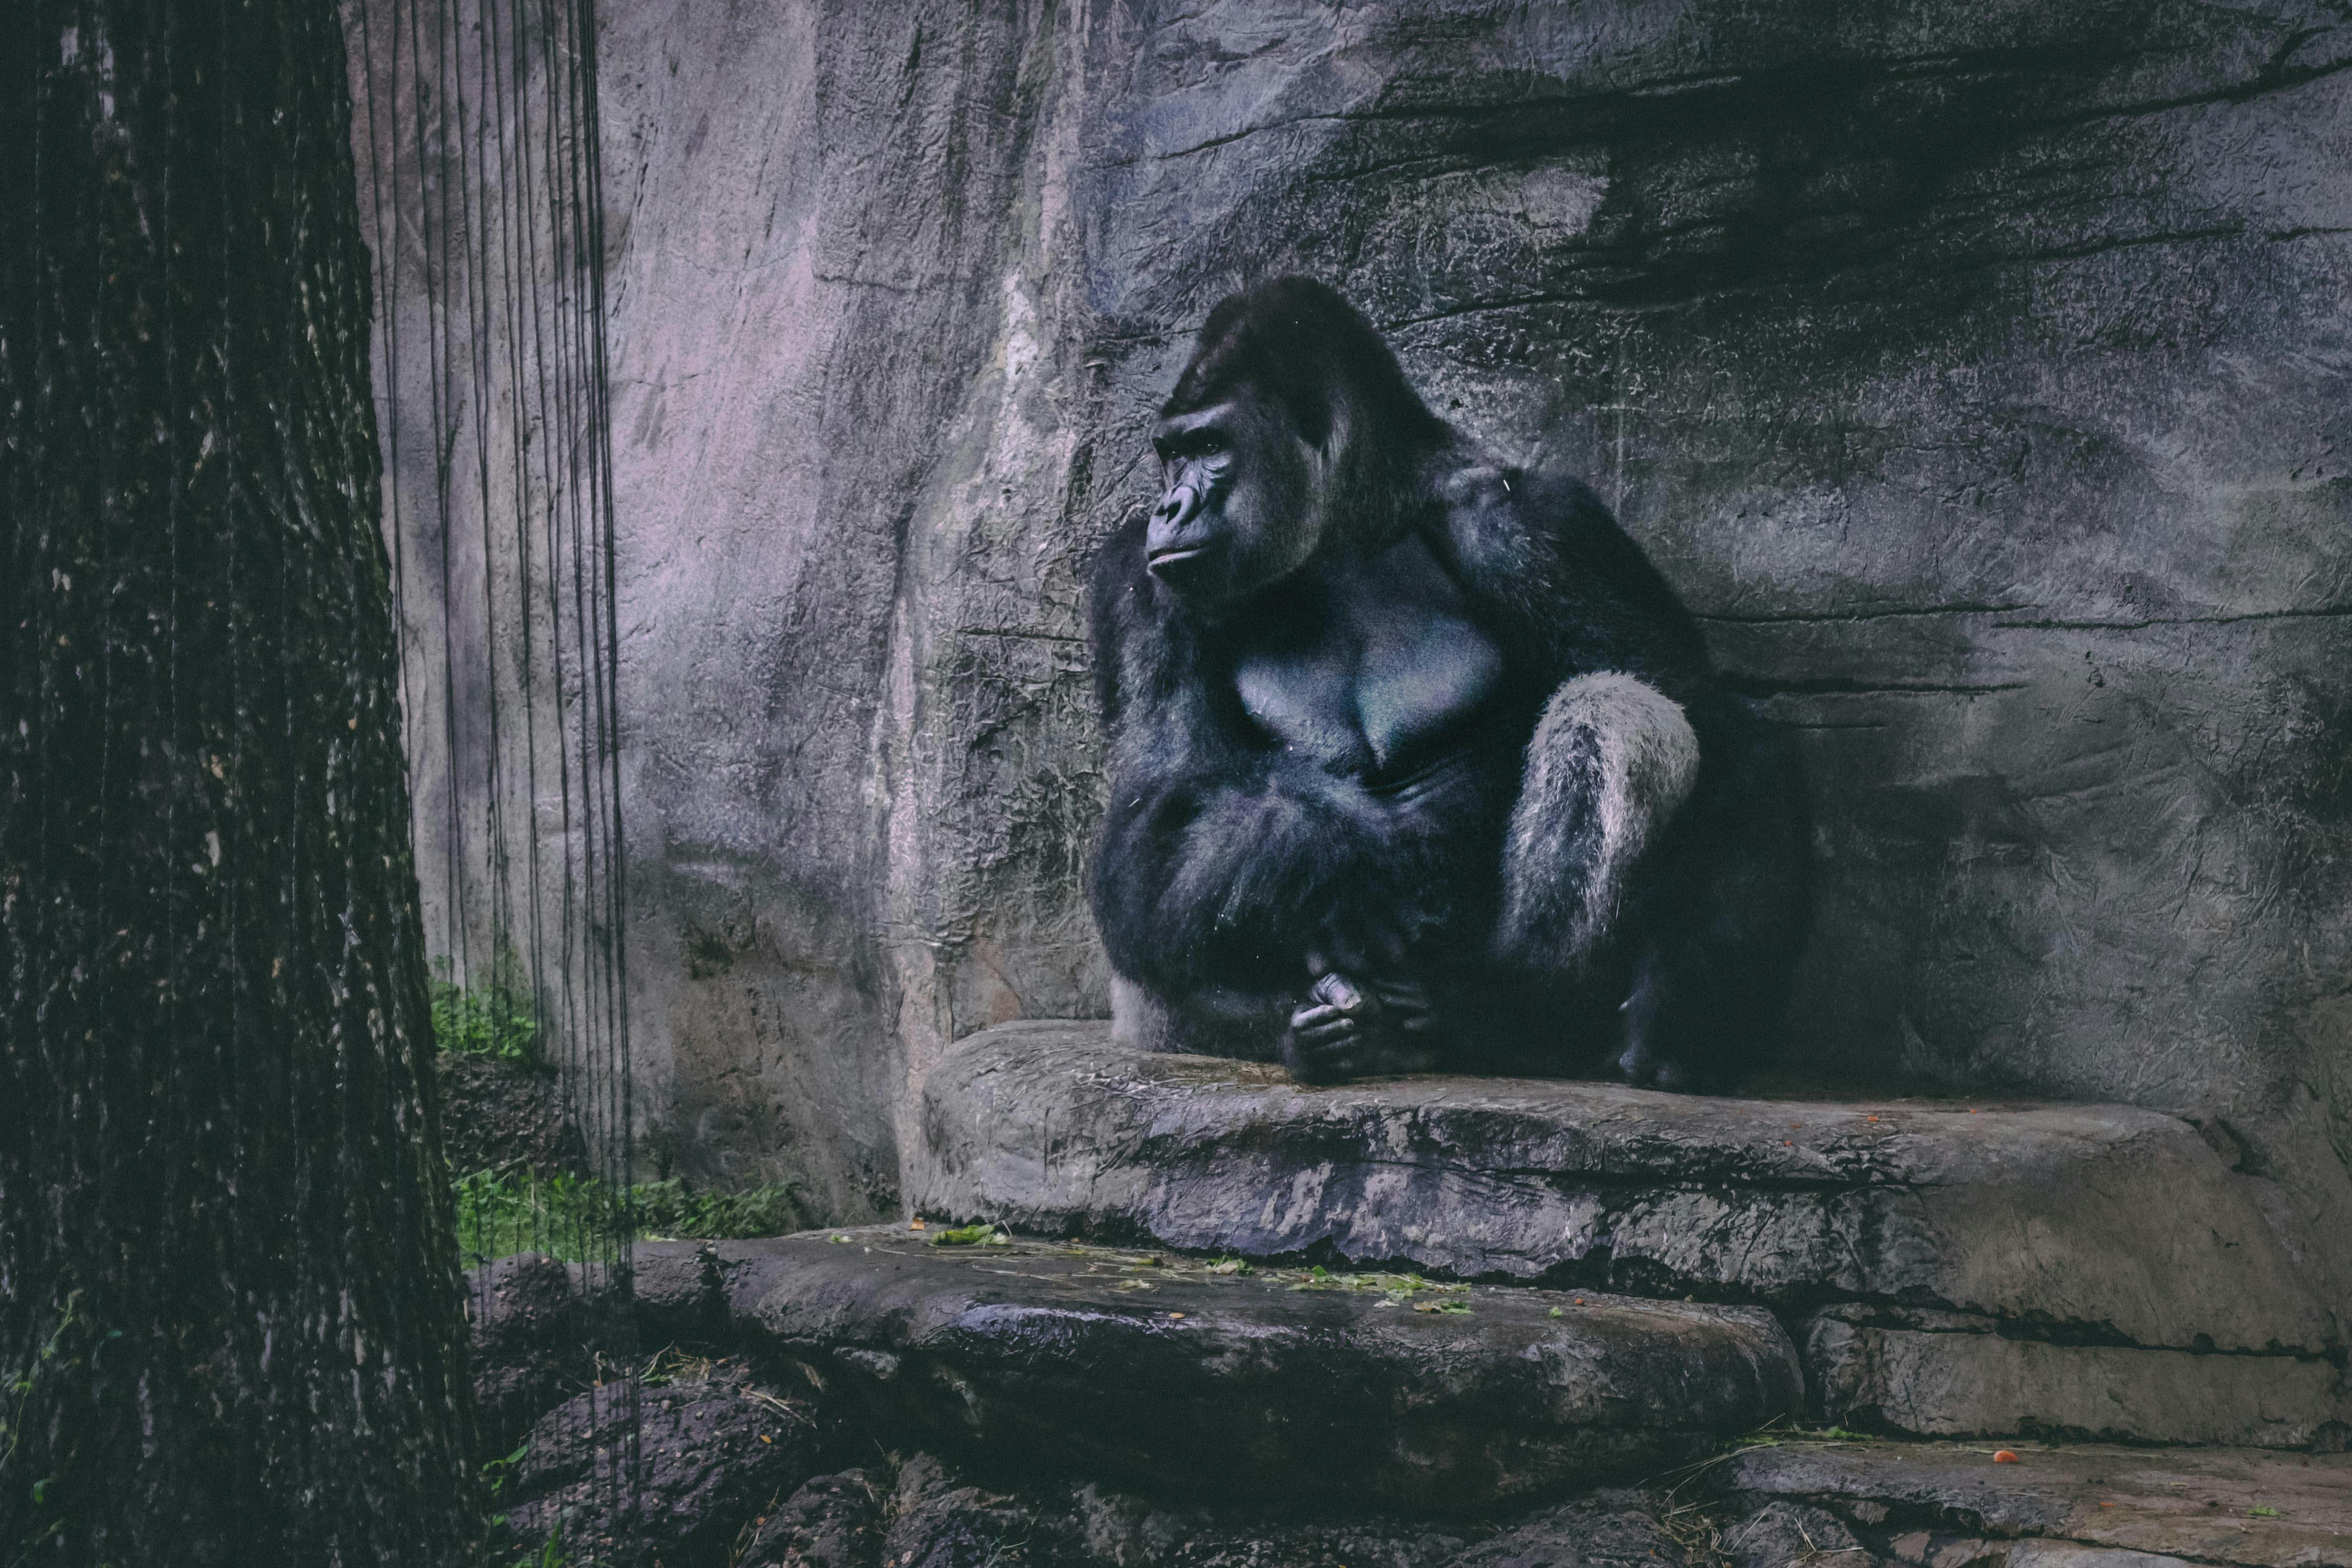 Download Gorilla wallpapers for mobile phone free Gorilla HD pictures